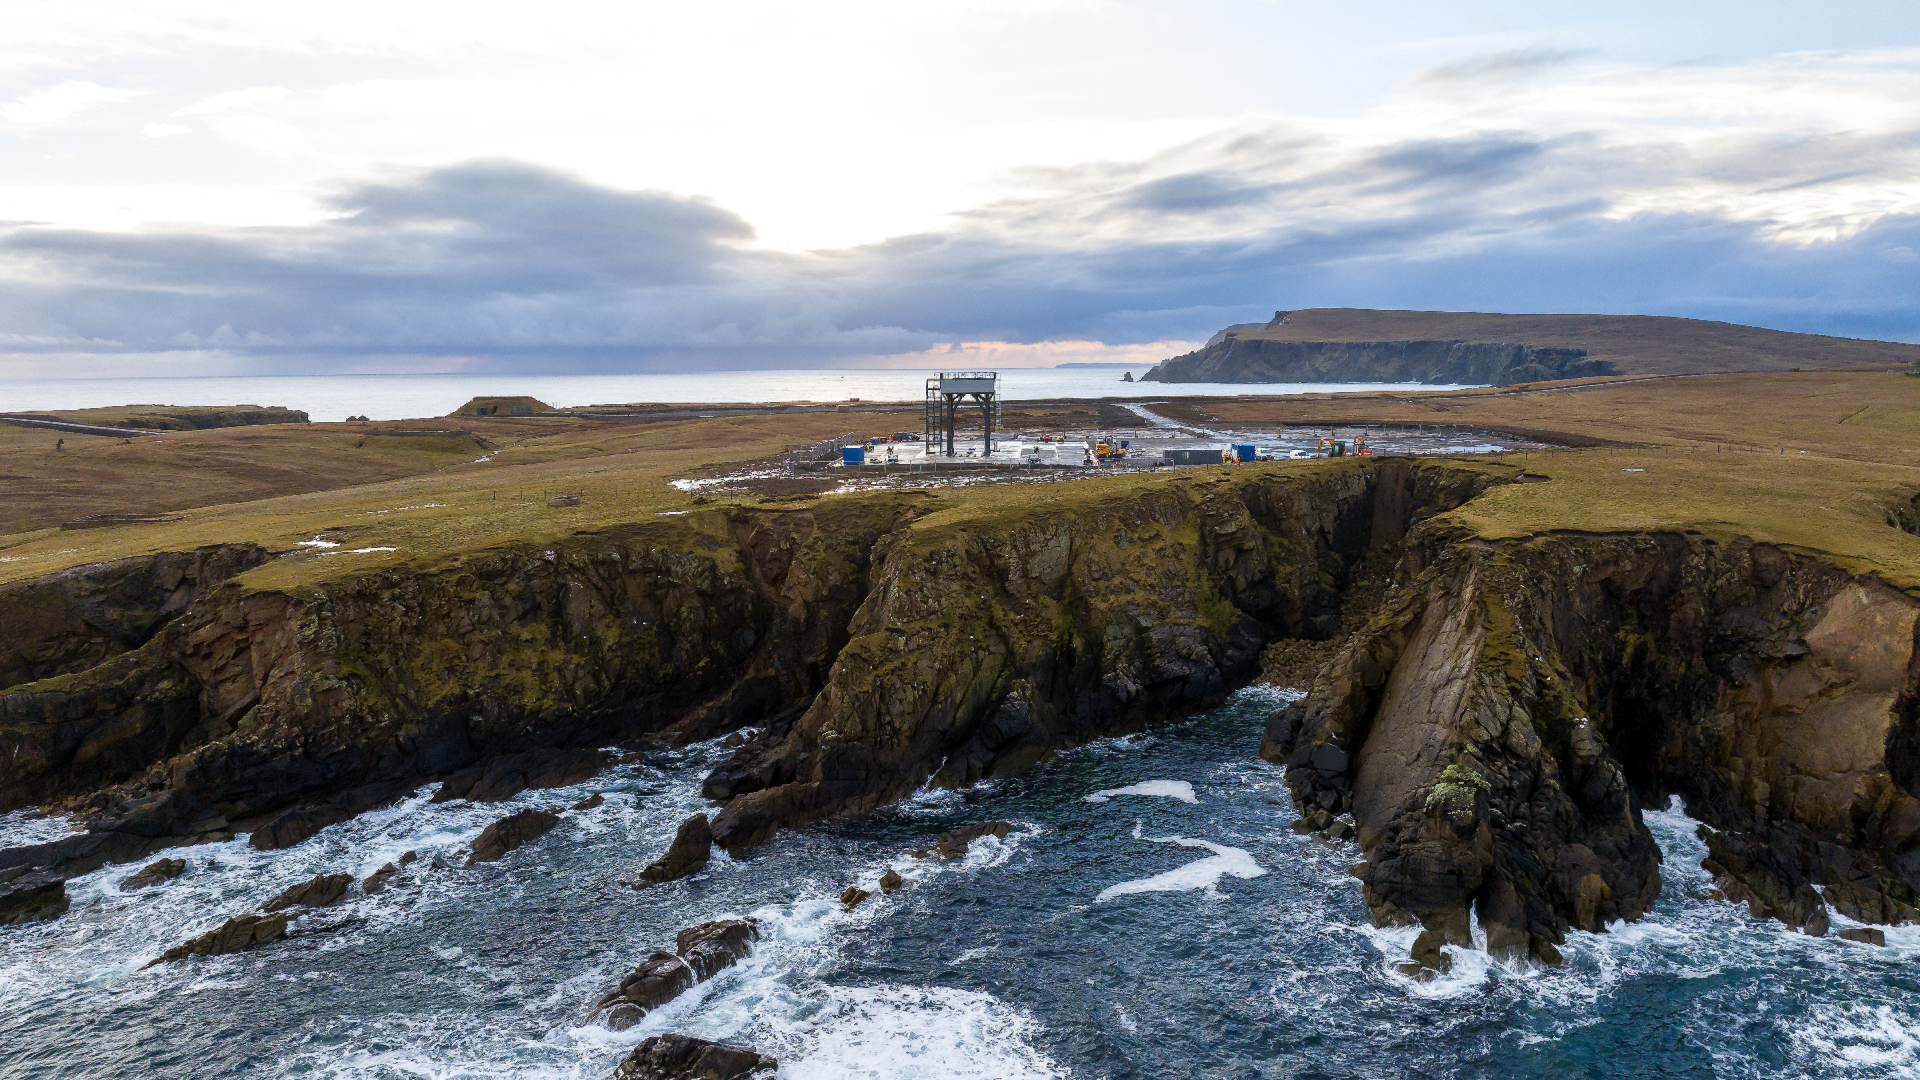 SaxaVord Spaceport is the UK’s first vertical satellite launch facility and ground station located at Lamba Ness in Unst, Shetland. 